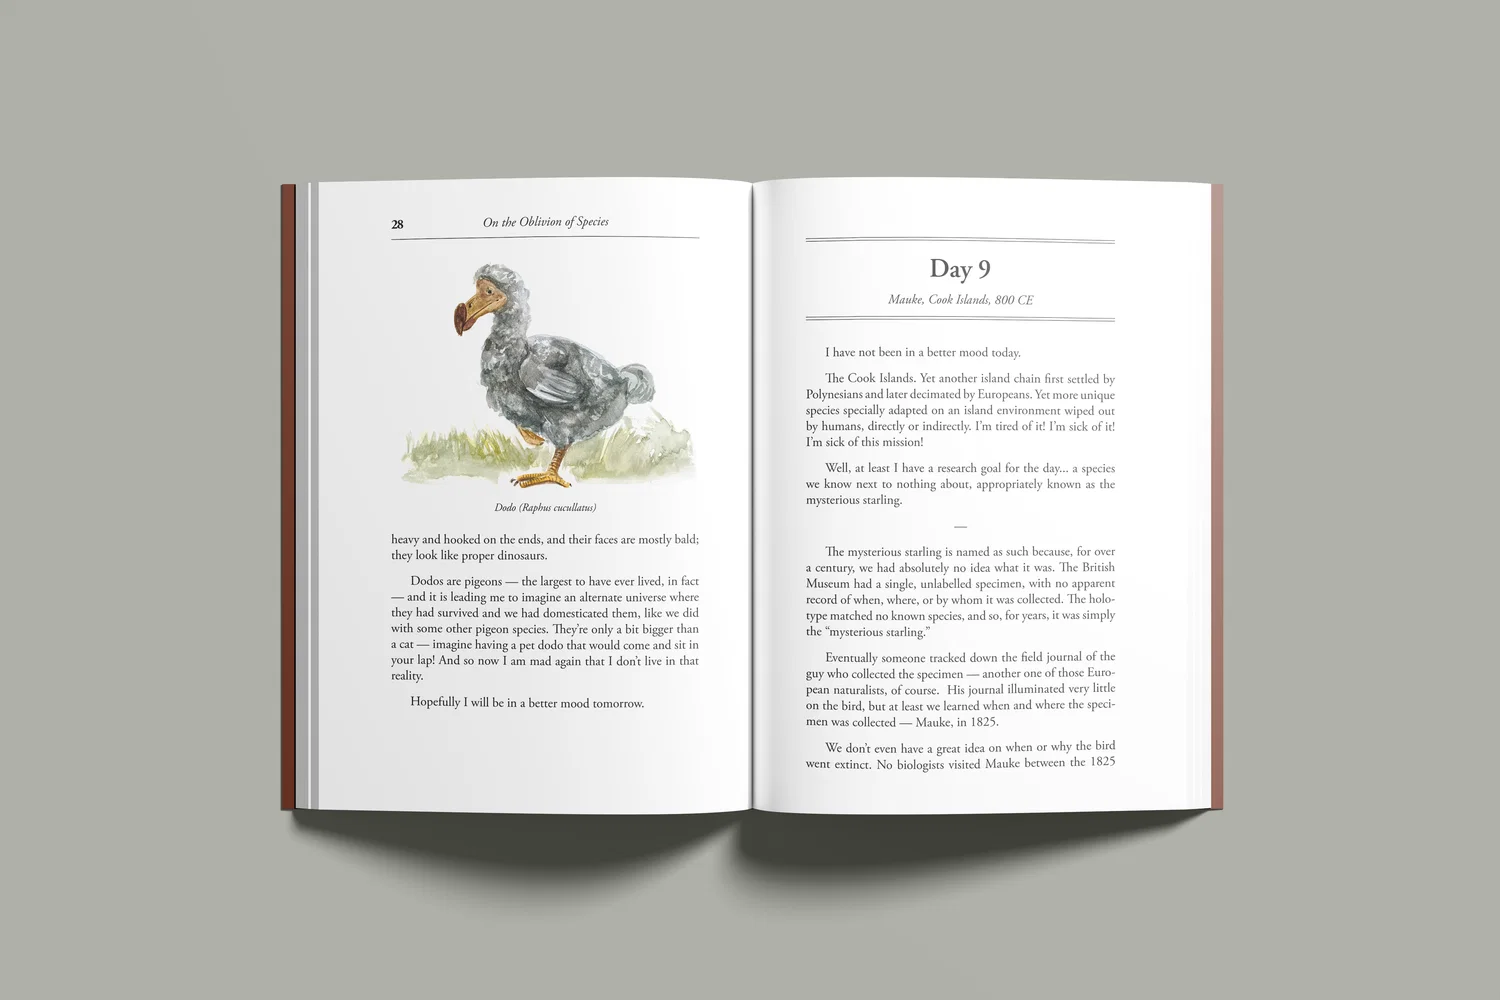 A mockup photo of a book, open to an interior pagespread. The book is typset as a novel. The left page features a realistic watercolor illustration of a dodo.